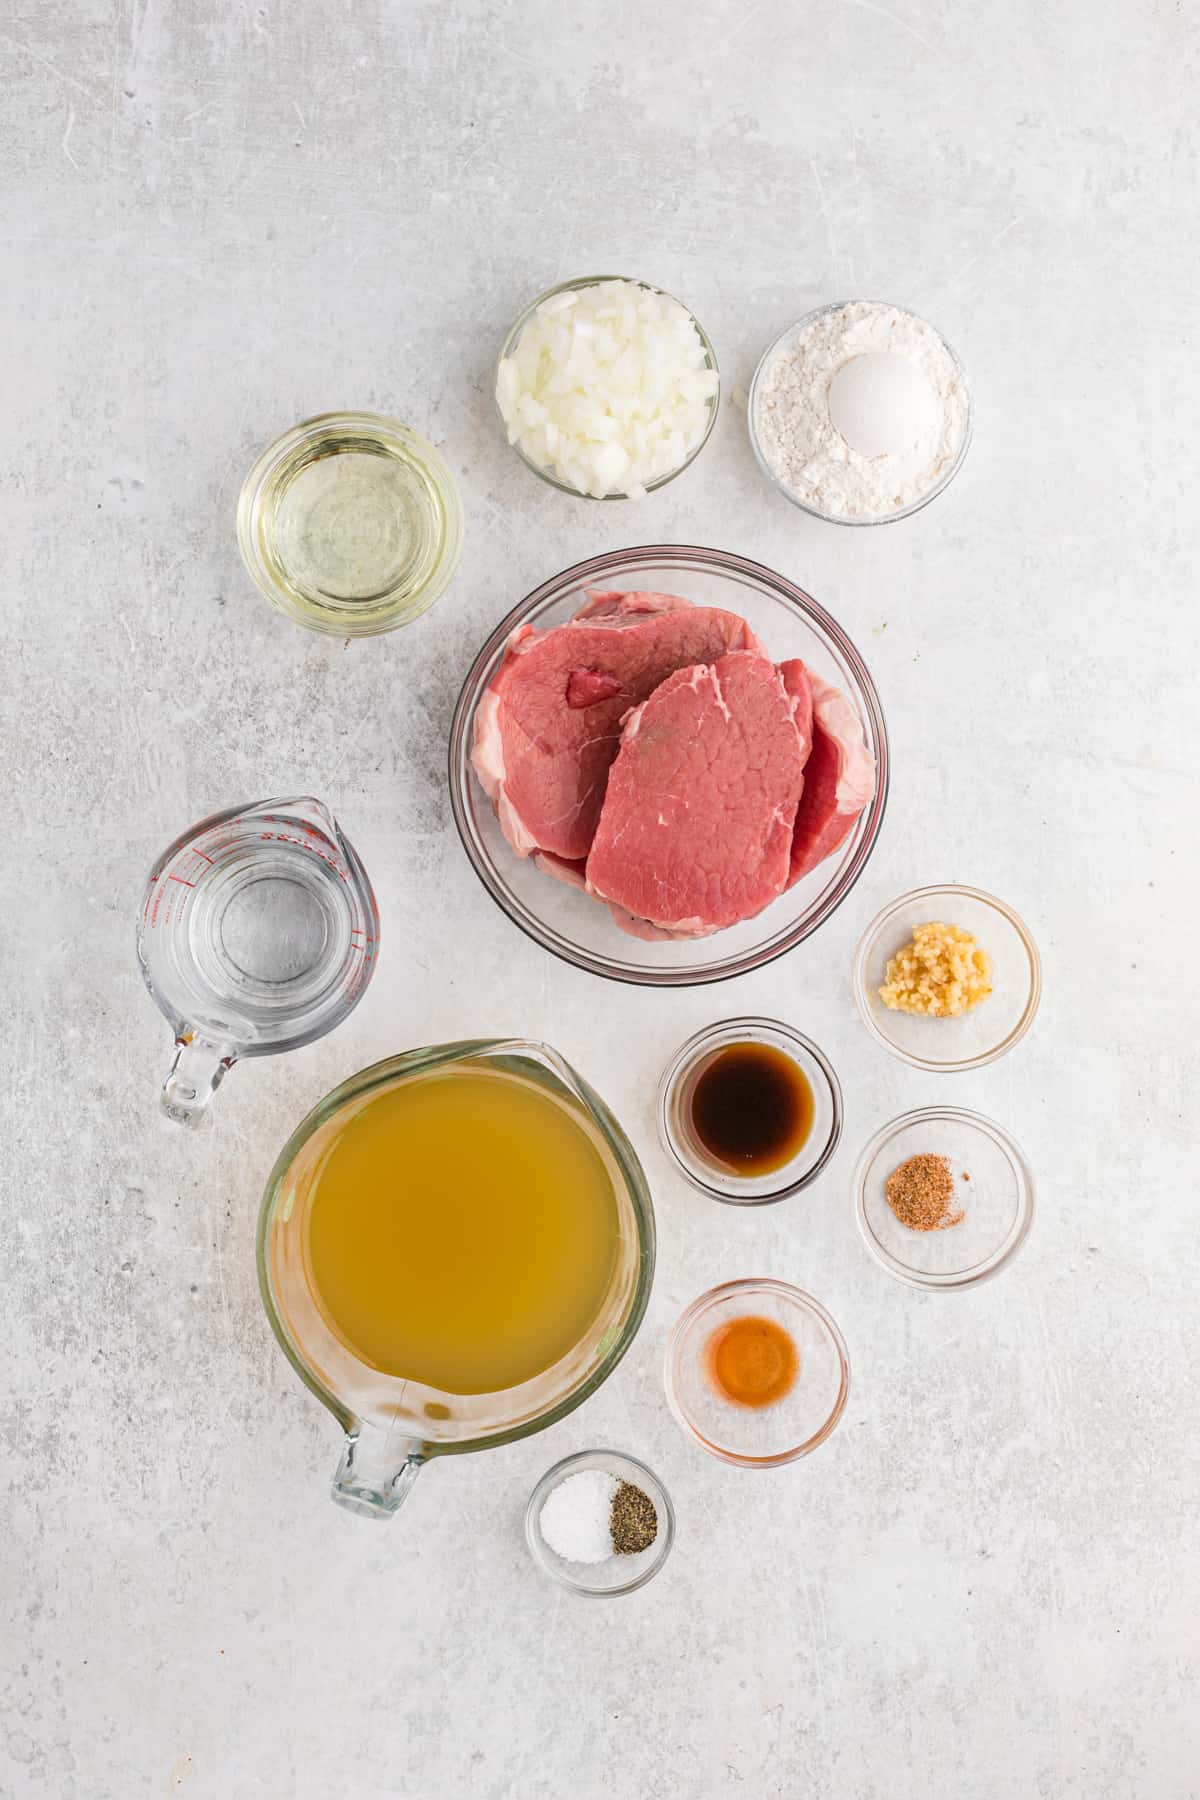 Ingredients to make smothered round steak in small bowls on a white surface.